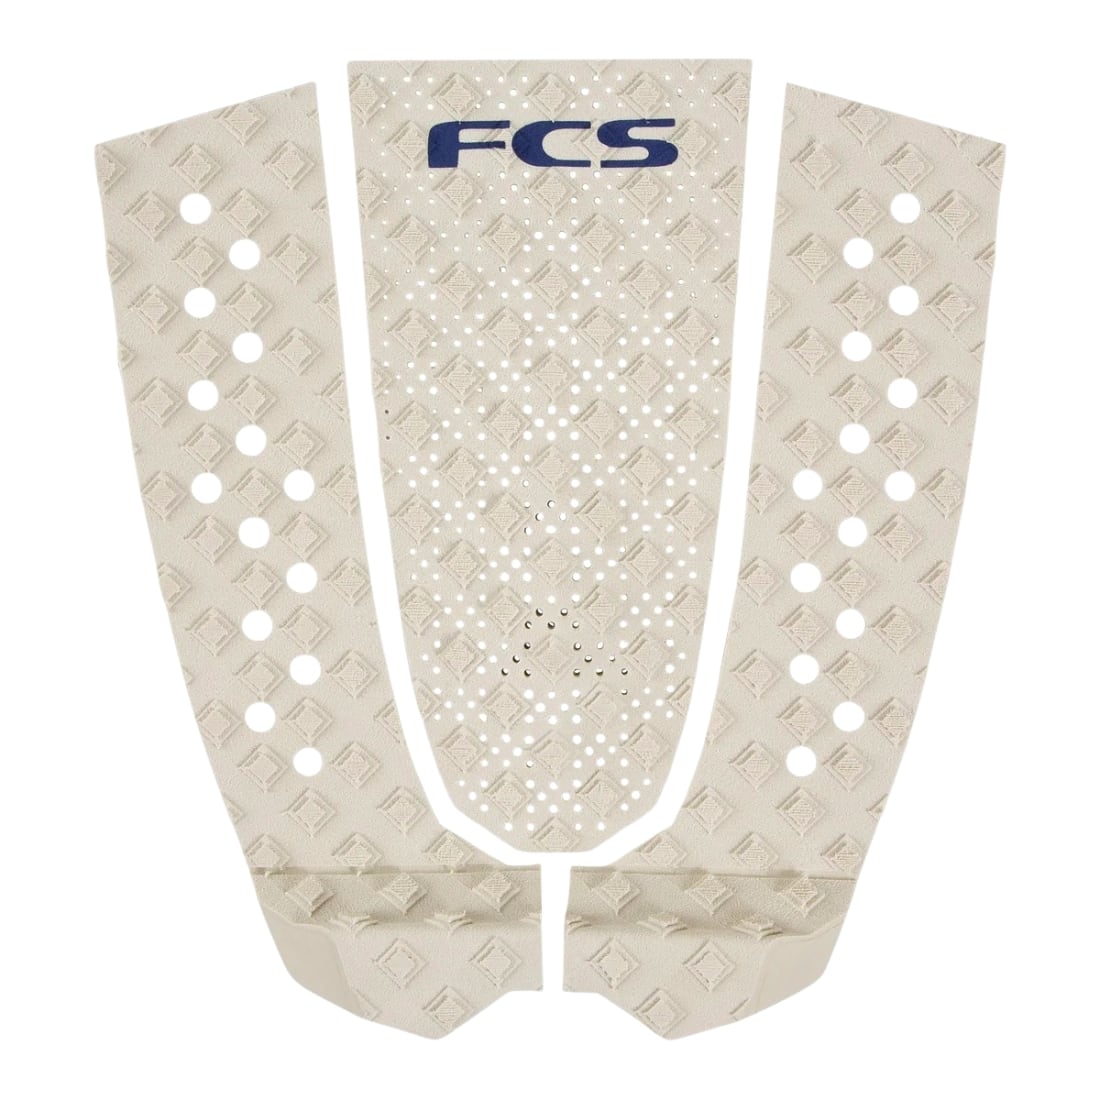 FCS T-3 Eco 3 Piece Surfboard Tail Pad - Warm Grey - 3 Piece Tail Pad by FCS